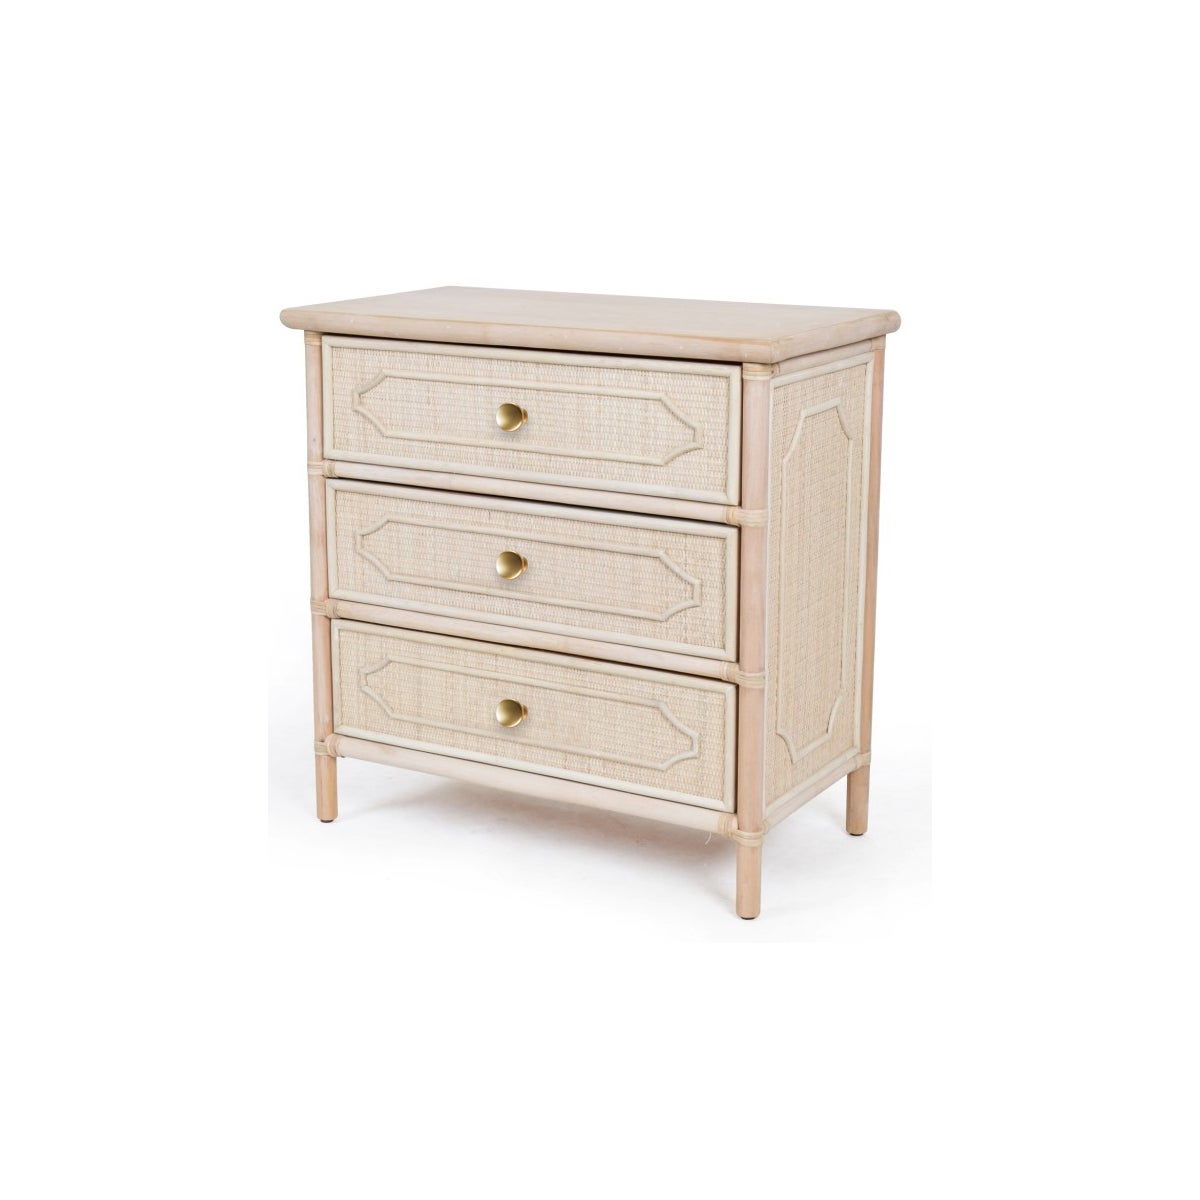 30" 3-Drawer Chippendale Chest  Unpainted - "Select Your Color"  Frame: Rattan & Wood